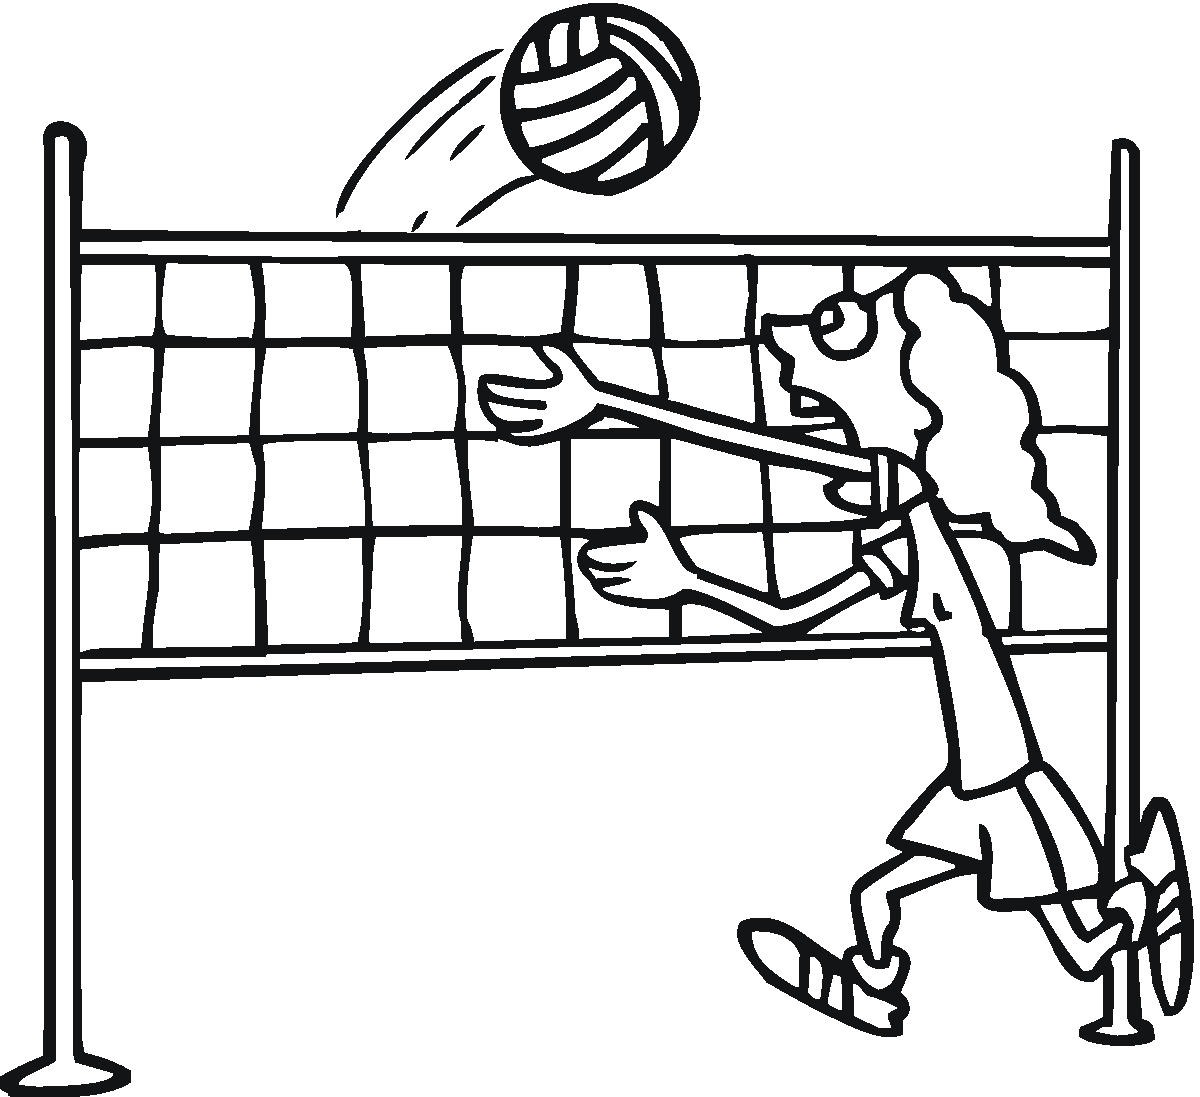 Volleyball net clipart black and white - ClipartFox